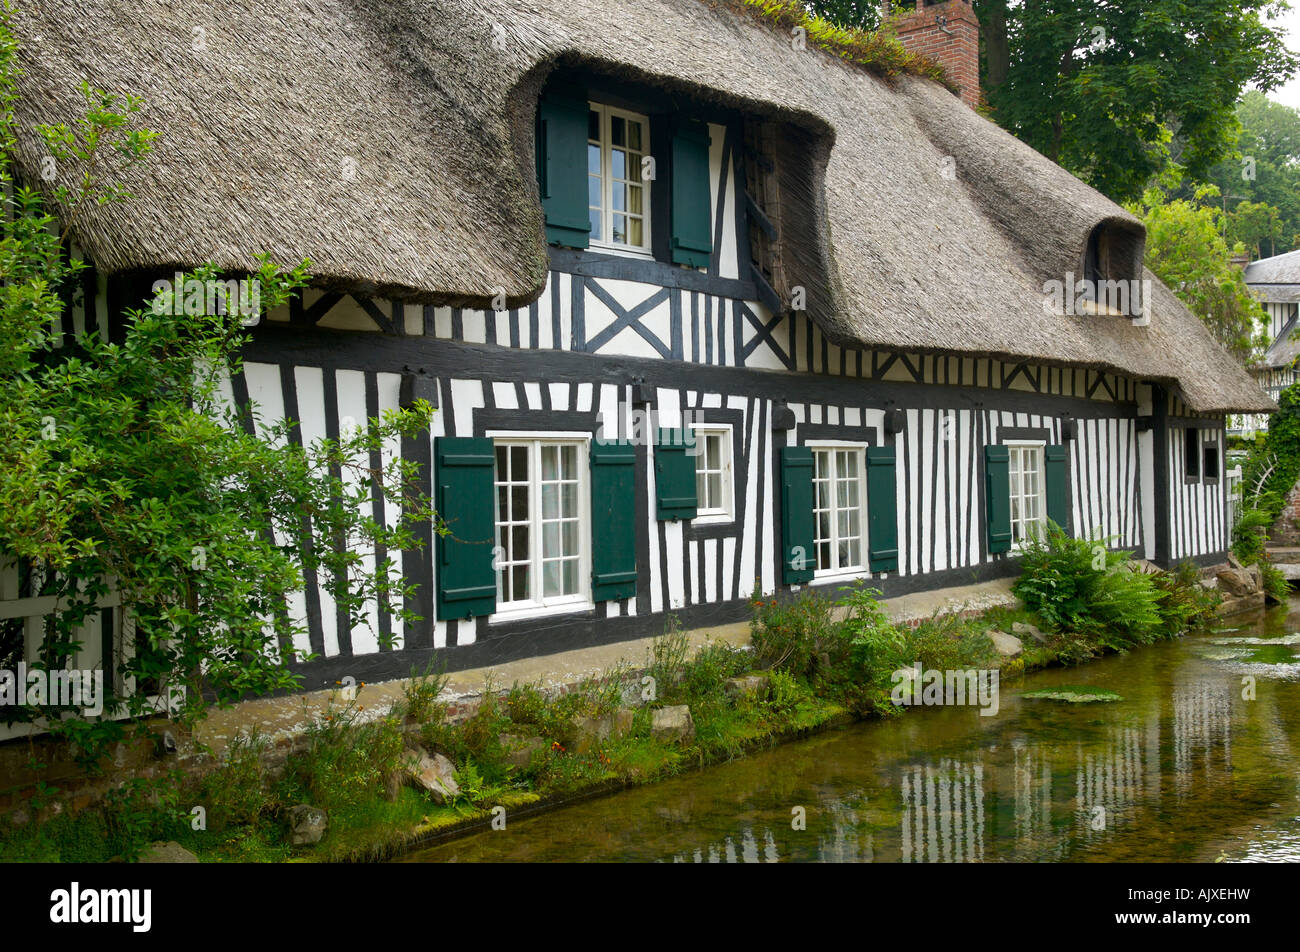 Normandy chaumiere or thatched cottage France Stock Photo